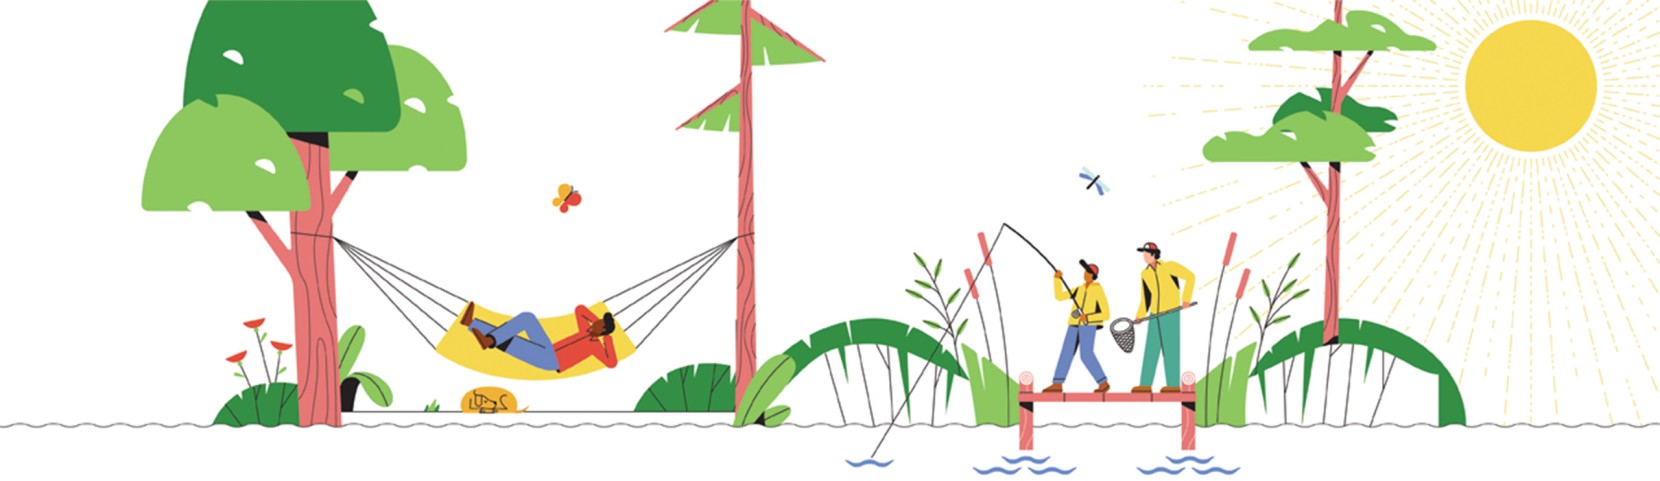 Sunsmart illustration of person in a hammock and two people fishing.